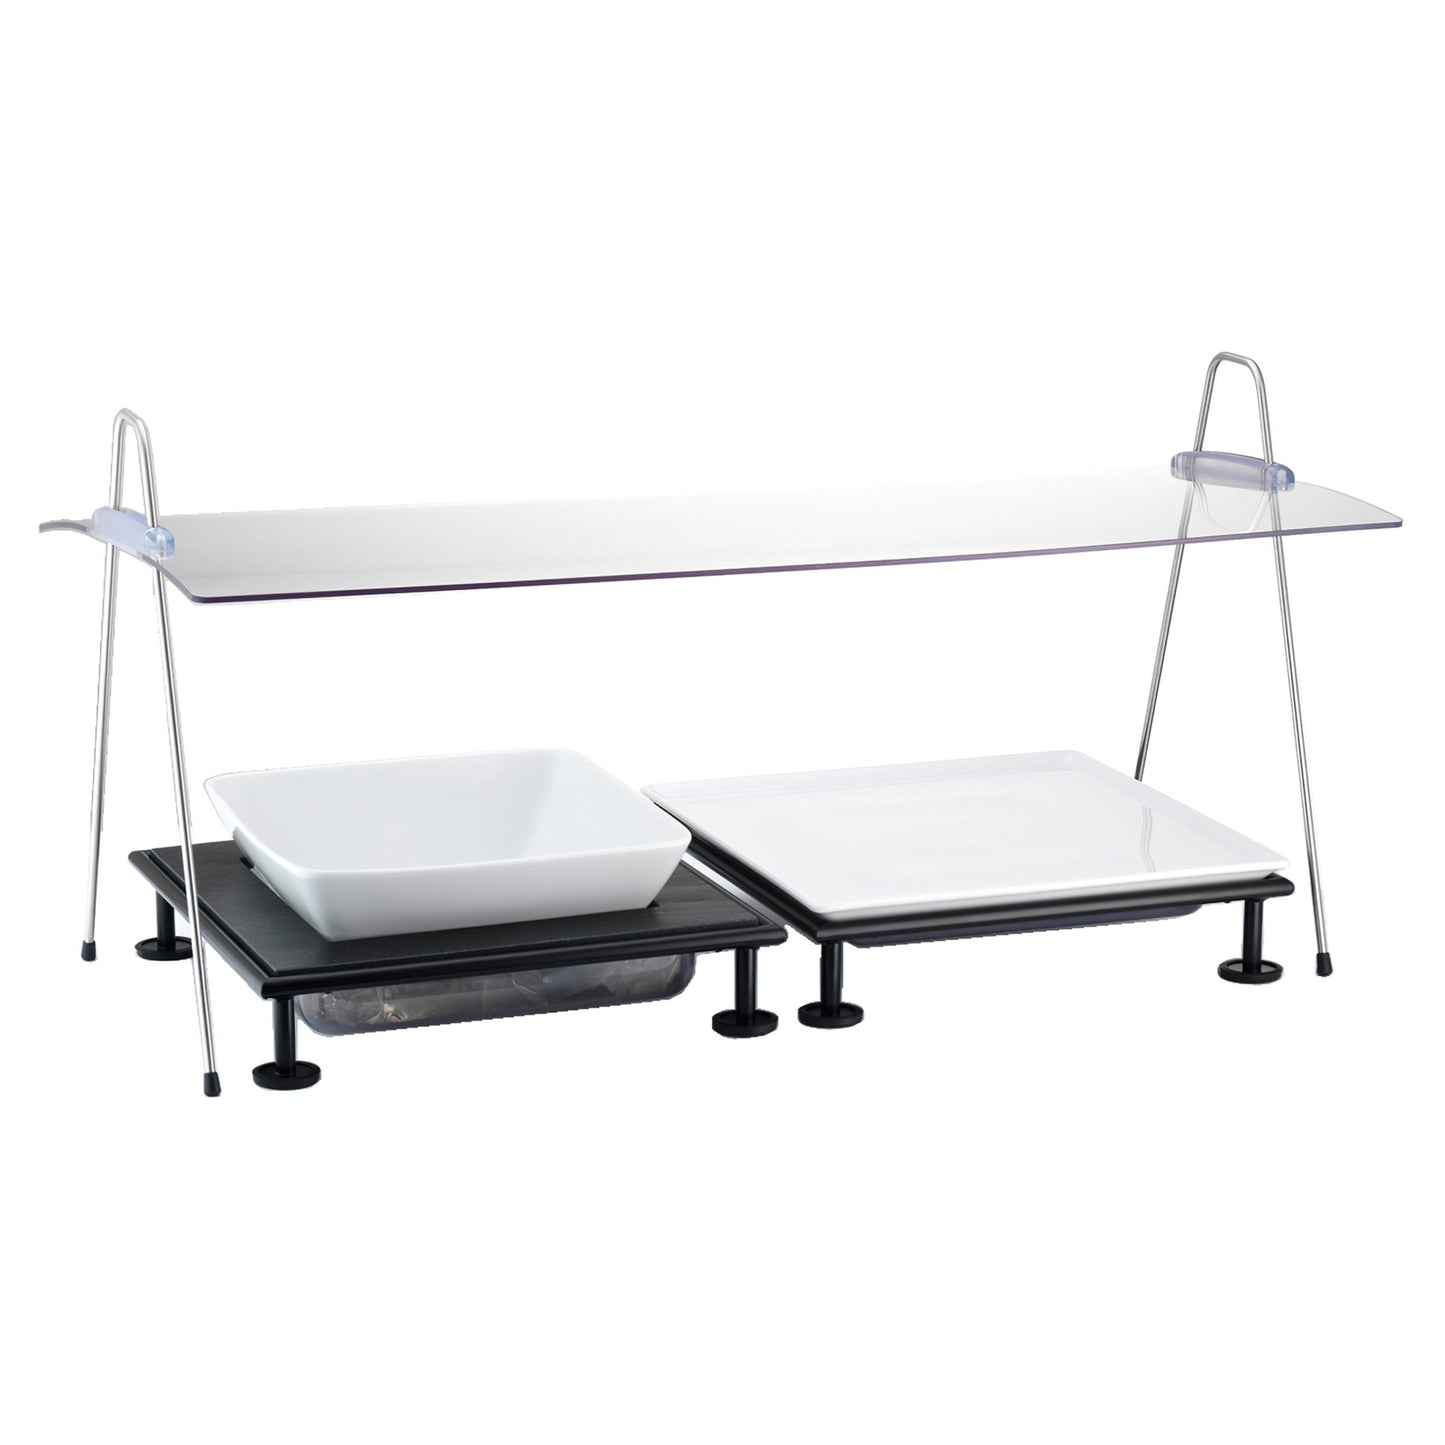 Acrylic Rectangular Sneeze Guard, Portable and Adjustable Incline for a 25" Display. Includes Wire Legs. 25.6" x 16.5", 15.4" tall. FRILICH EB702E ELEGANCE (Fits ETO000E001 Bread Board, EFC000E019 Cold Food Display Set)